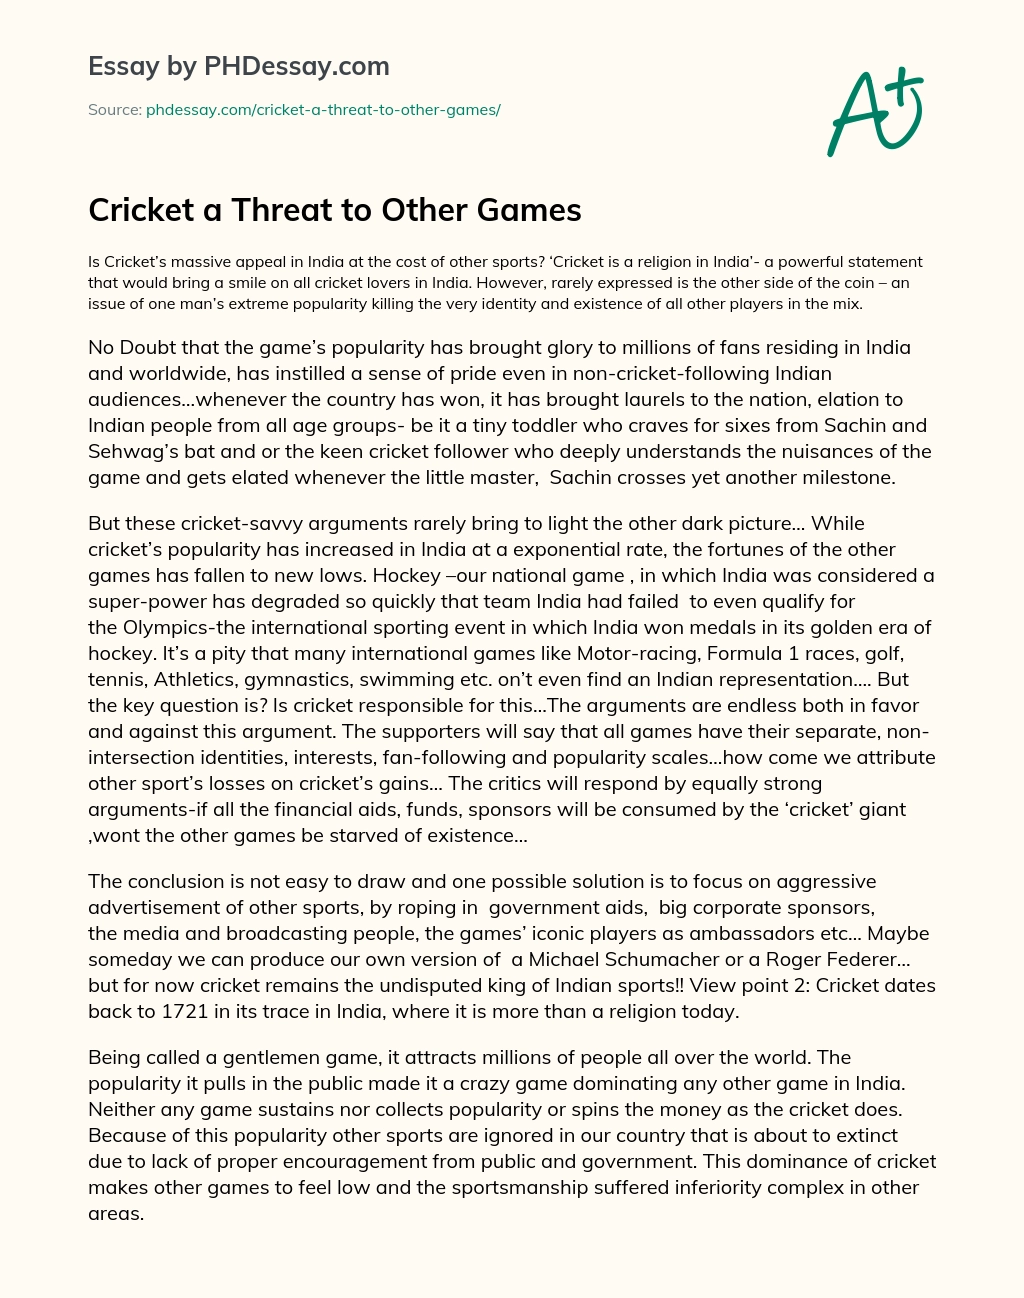 Cricket a Threat to Other Games essay